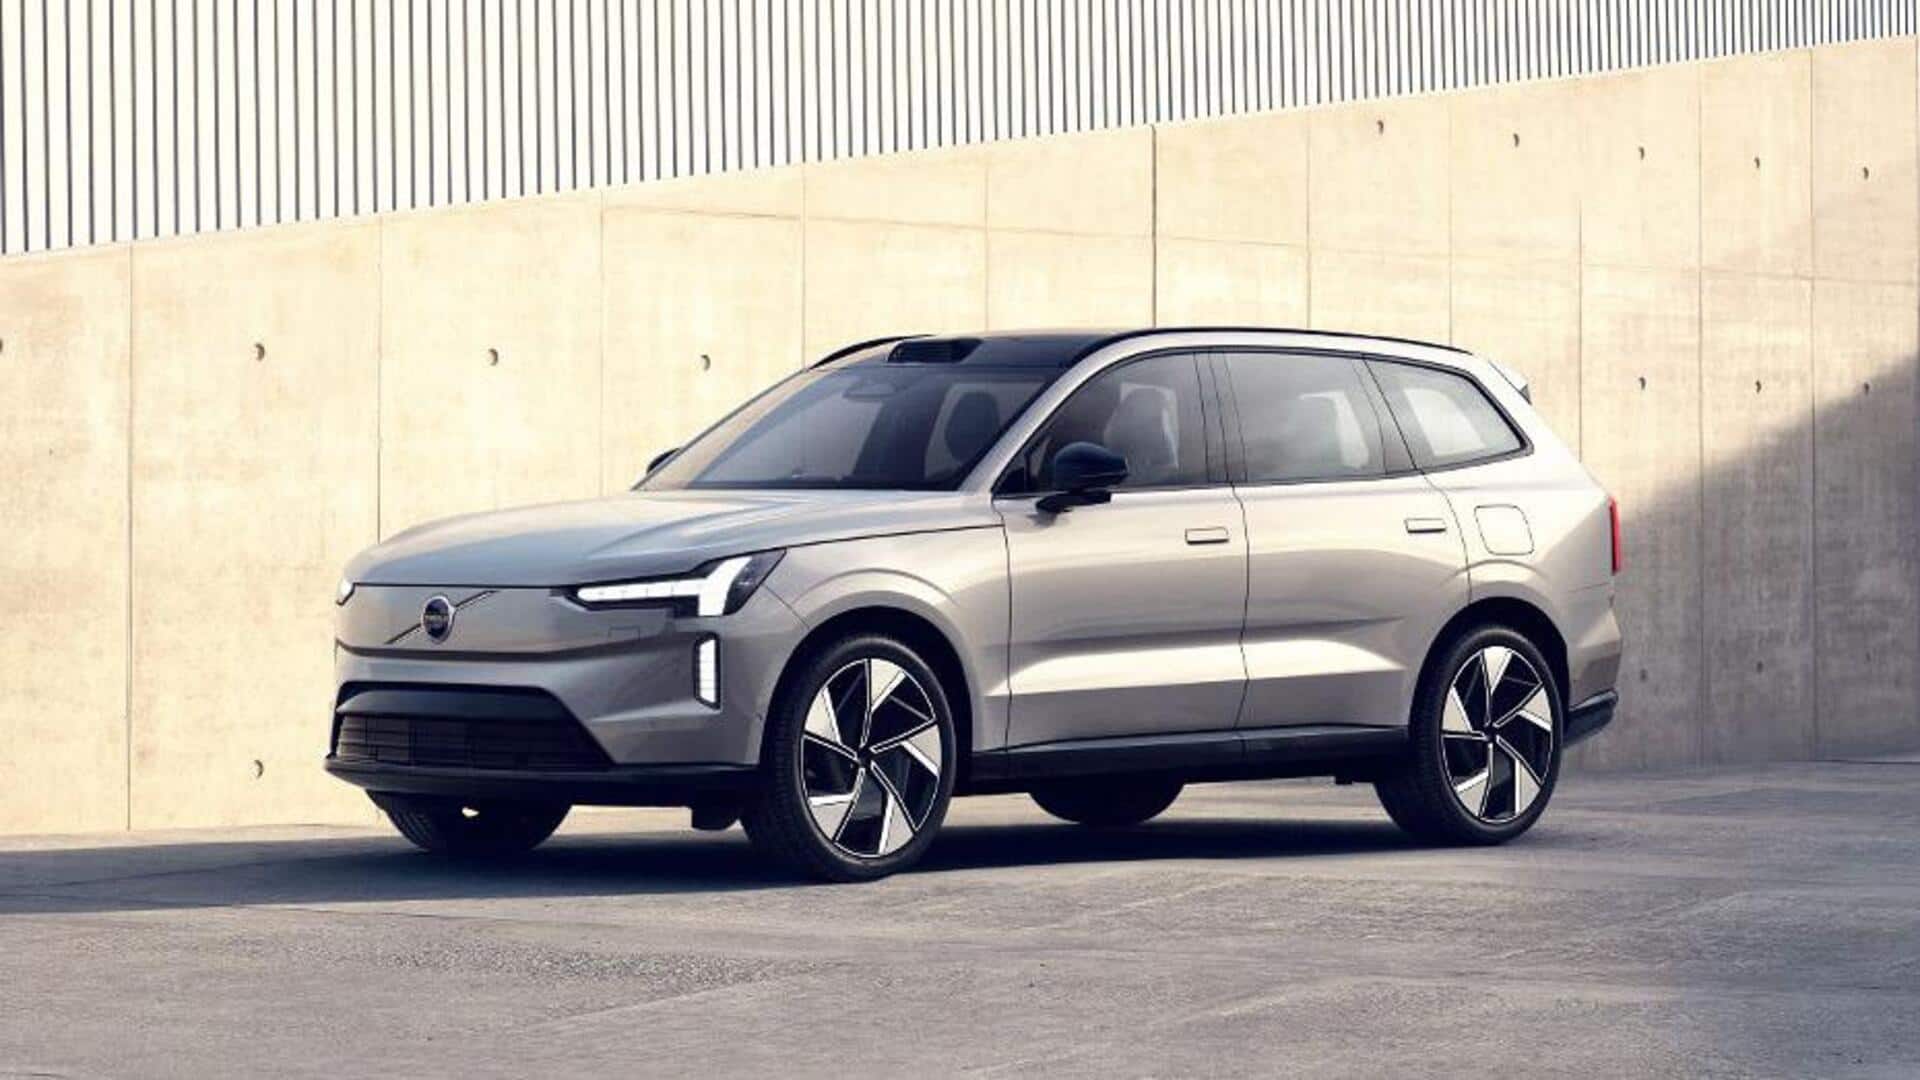 Volvo to launch EX30, EX90 SUVs in India by 2025